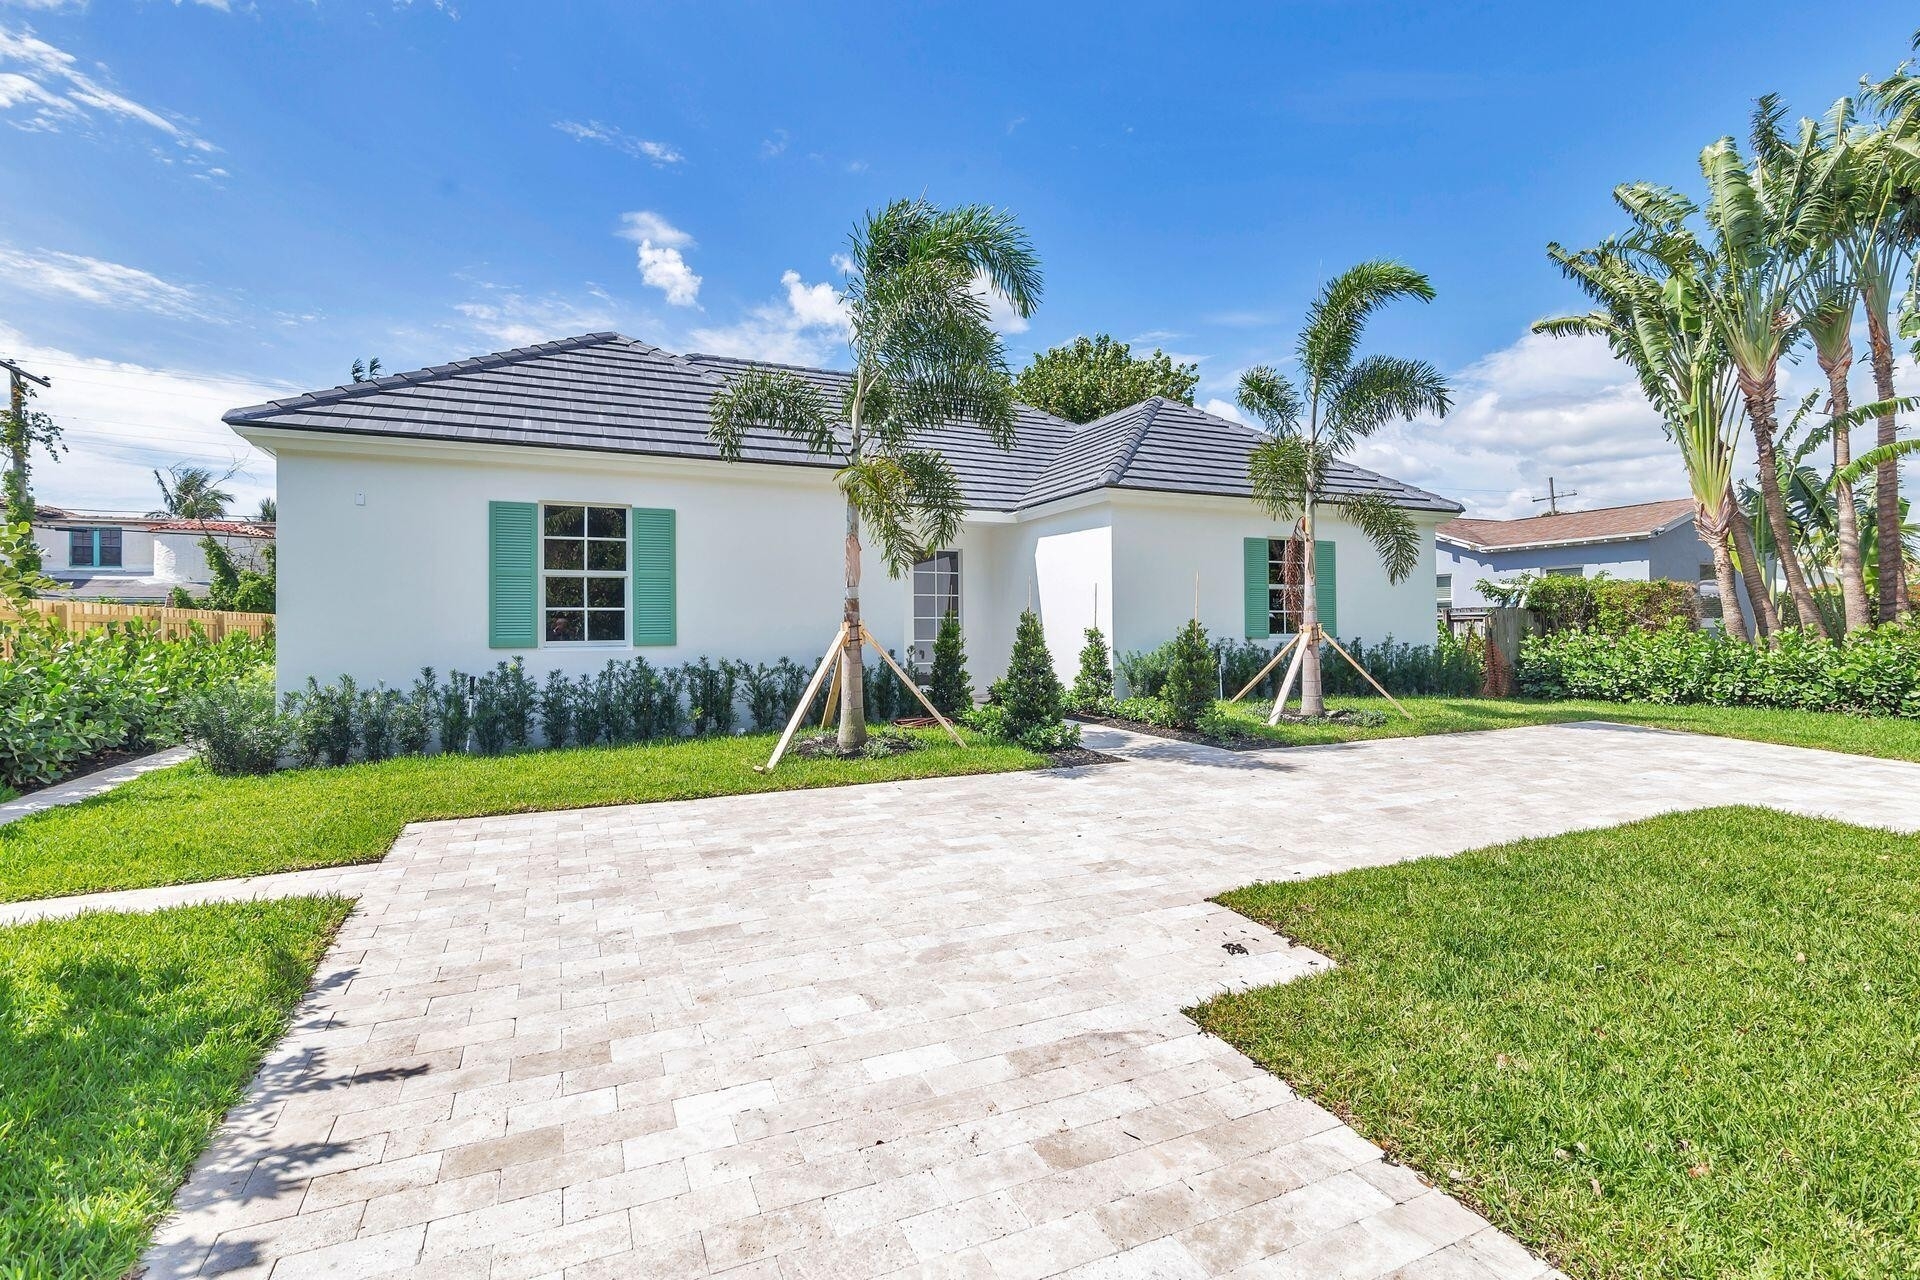 25. Single Family Homes for Sale at South End, West Palm Beach, FL 33405